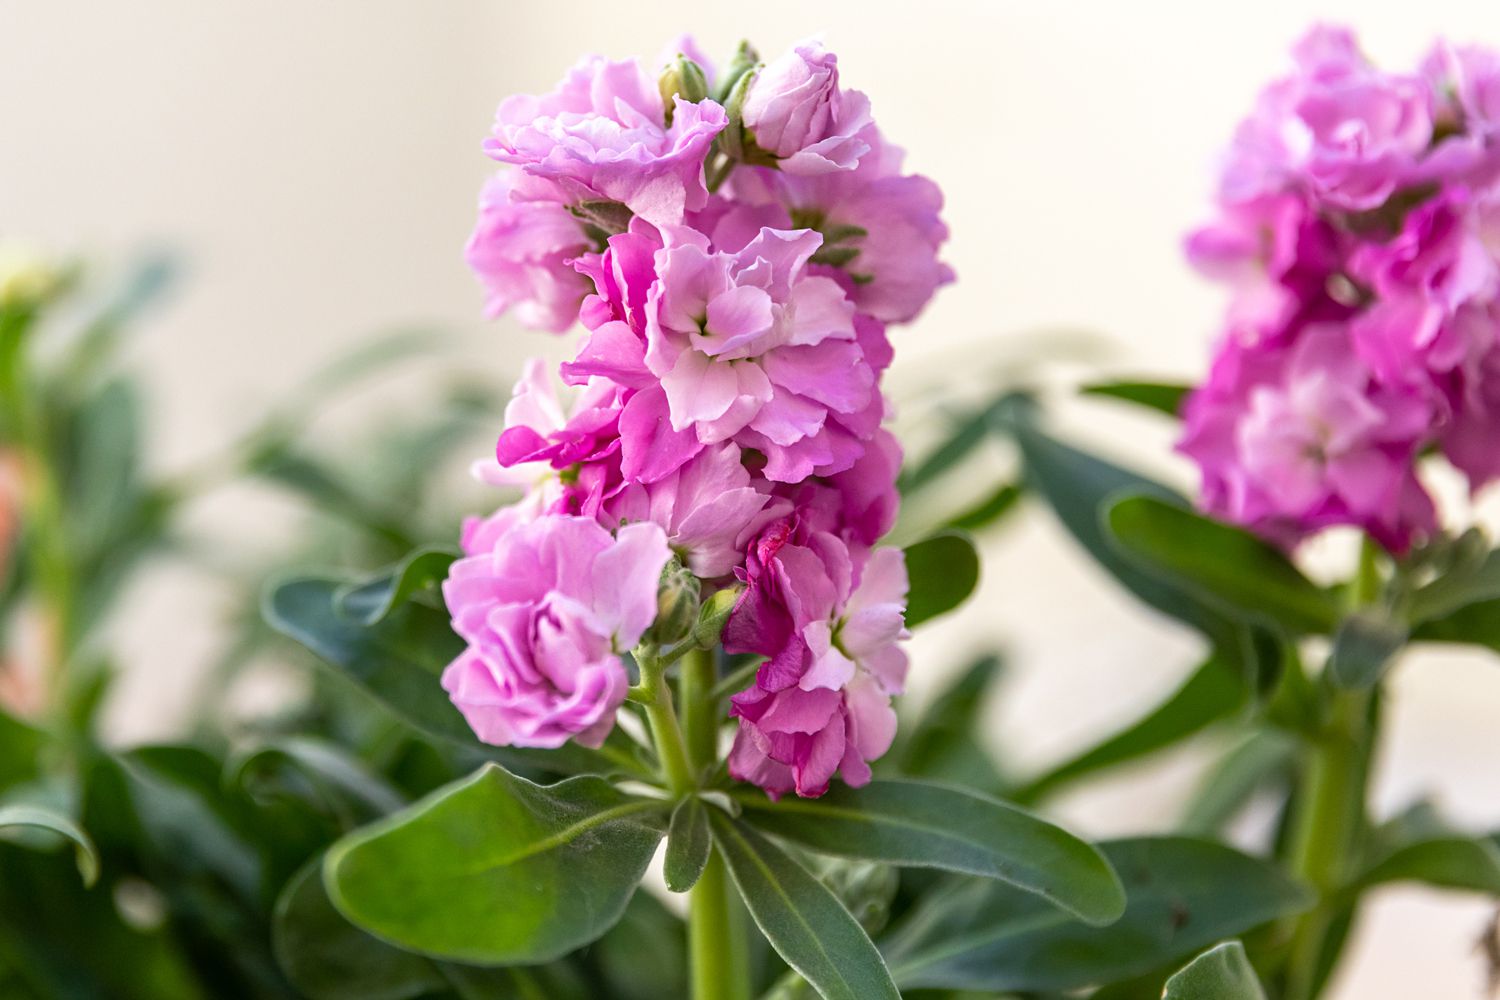 Stock flowers with pink petals on clustered stems